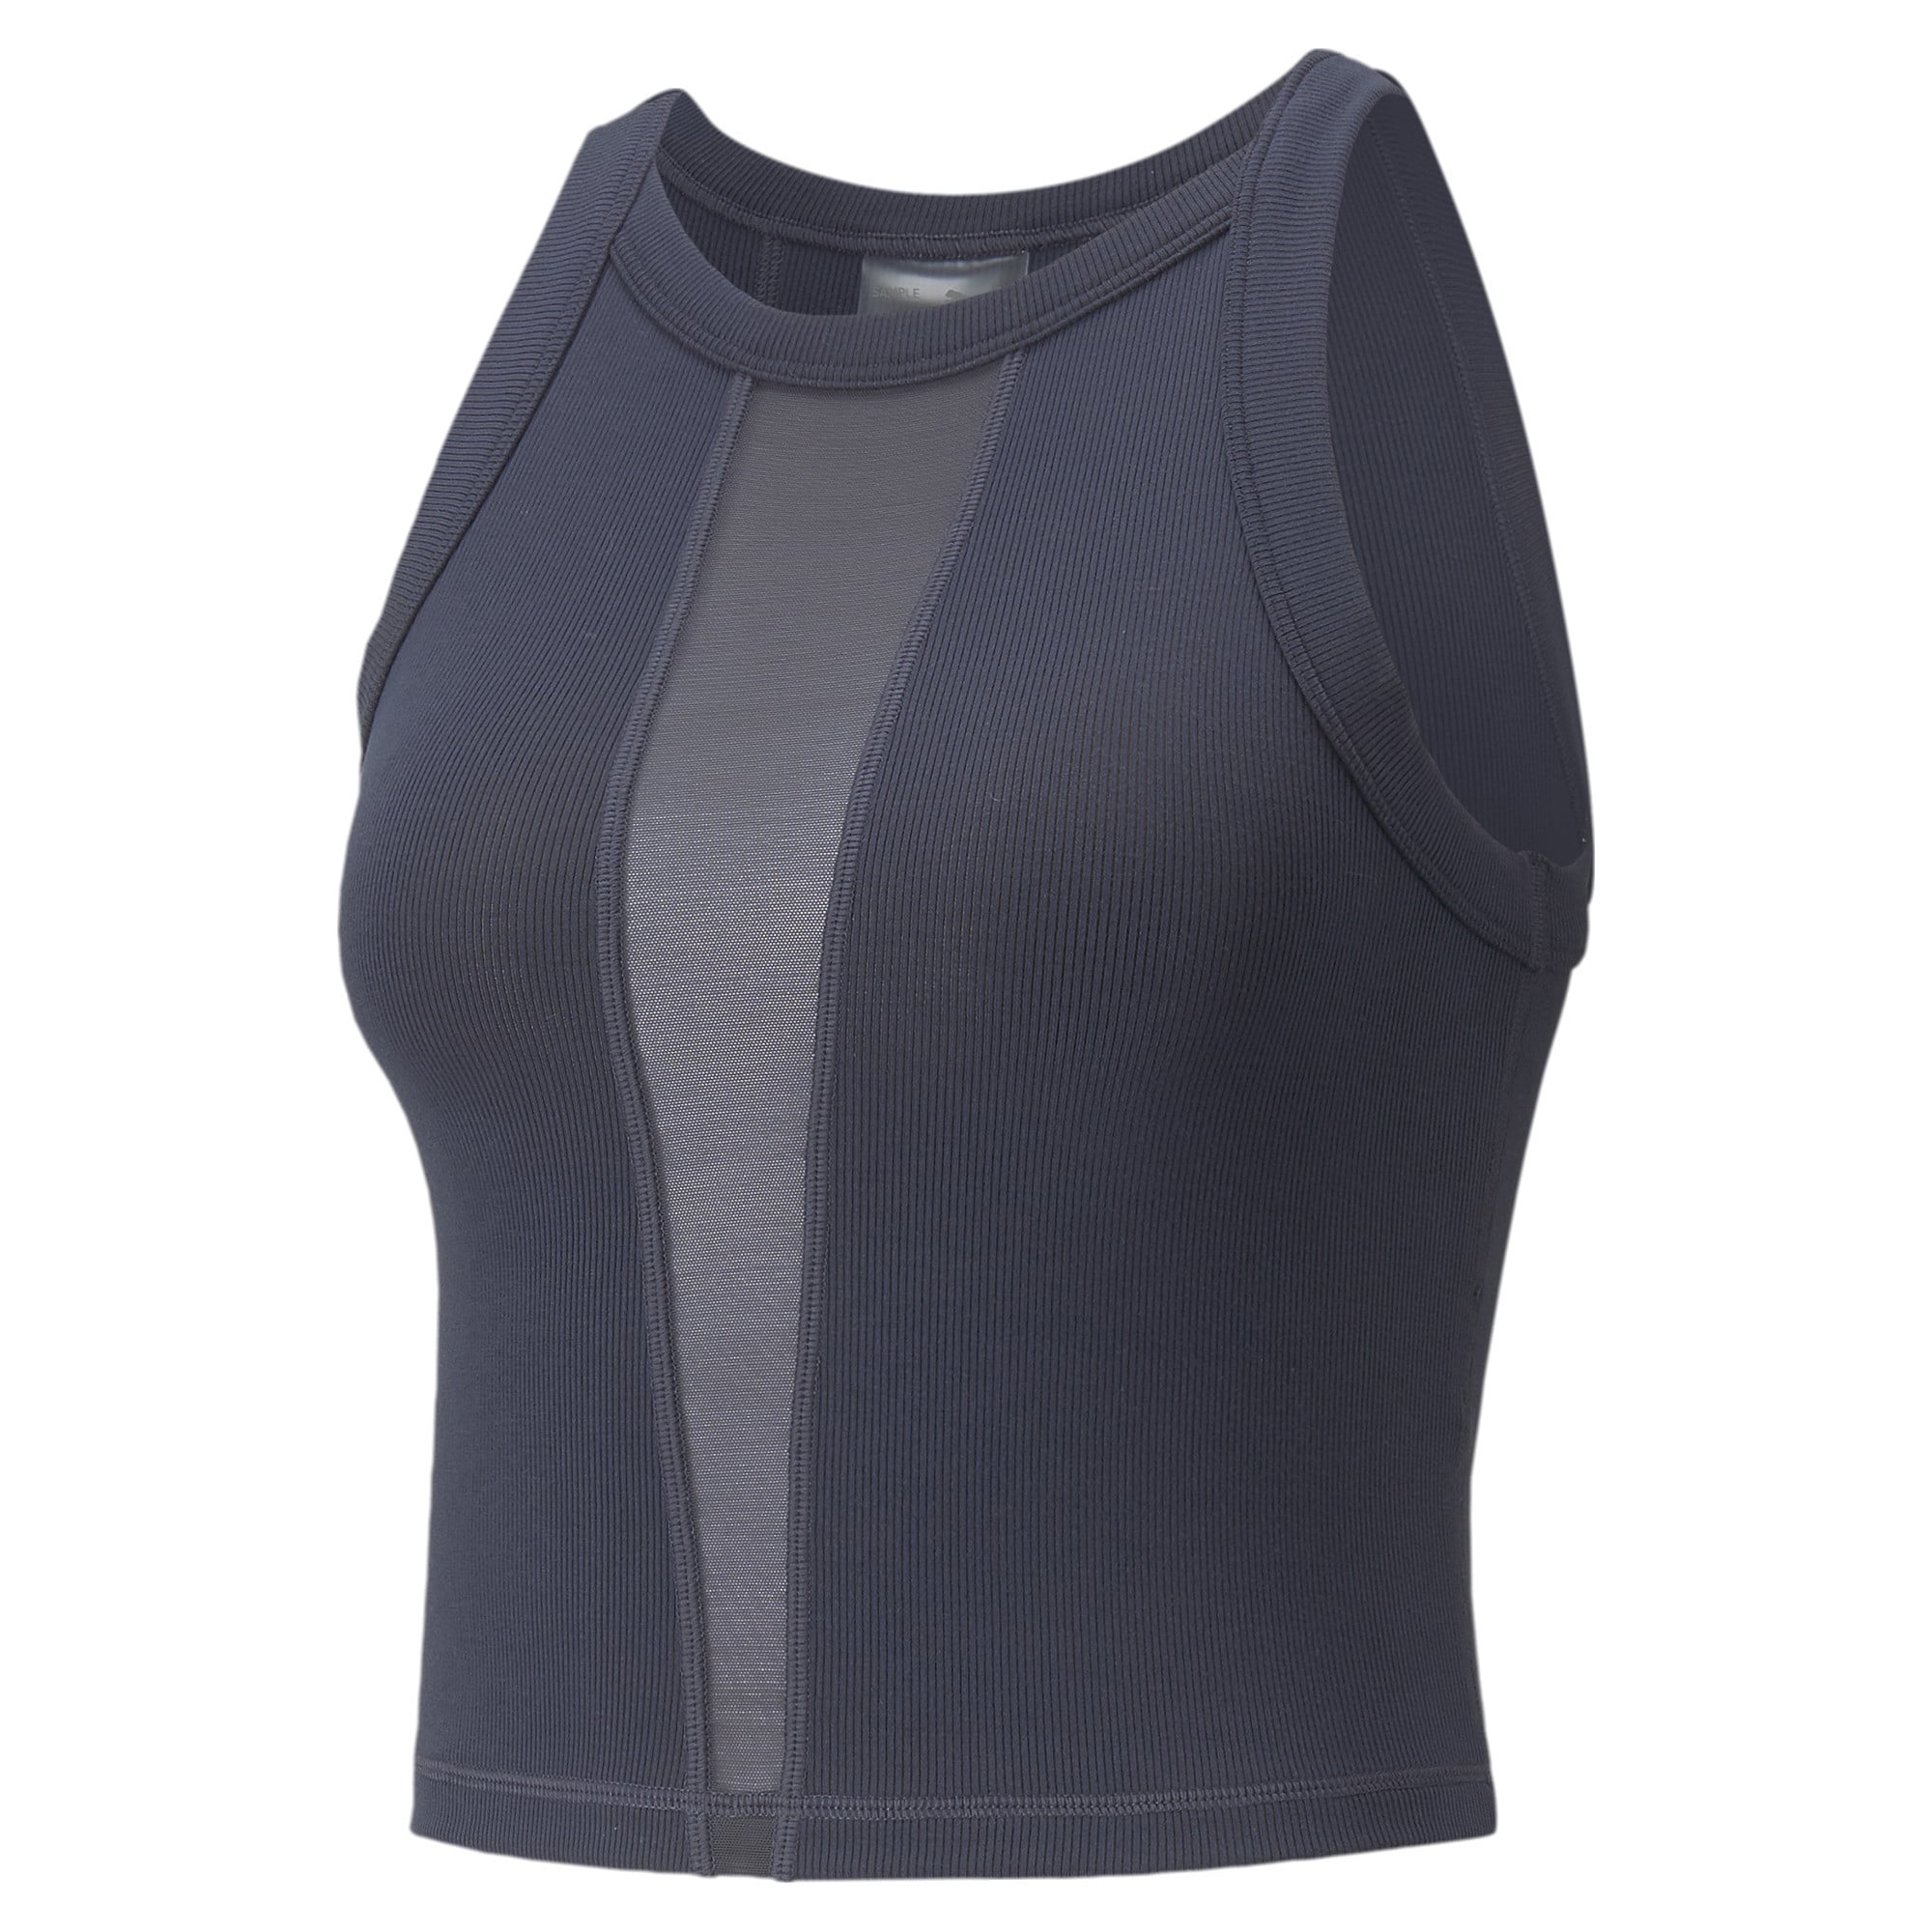 Puma's Exhale Ribbed Women's Training Tank Top